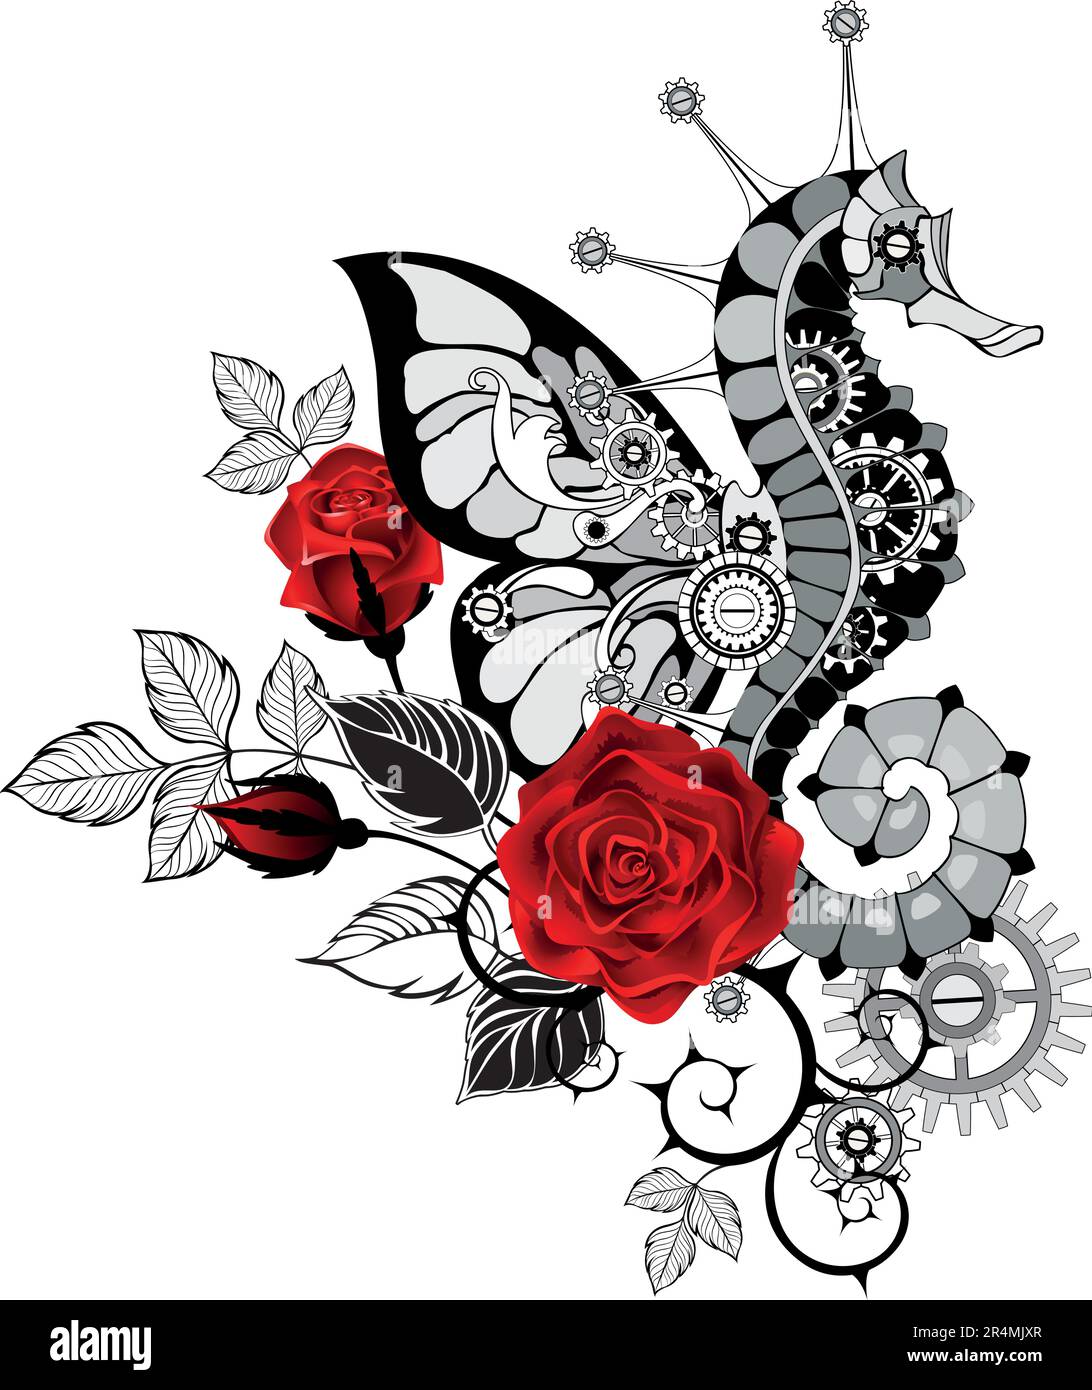 Steampunk composition of an outlined, artistically drawn, mechanical seahorse with butterfly wing, decorated with black stems and blooming red roses o Stock Vector